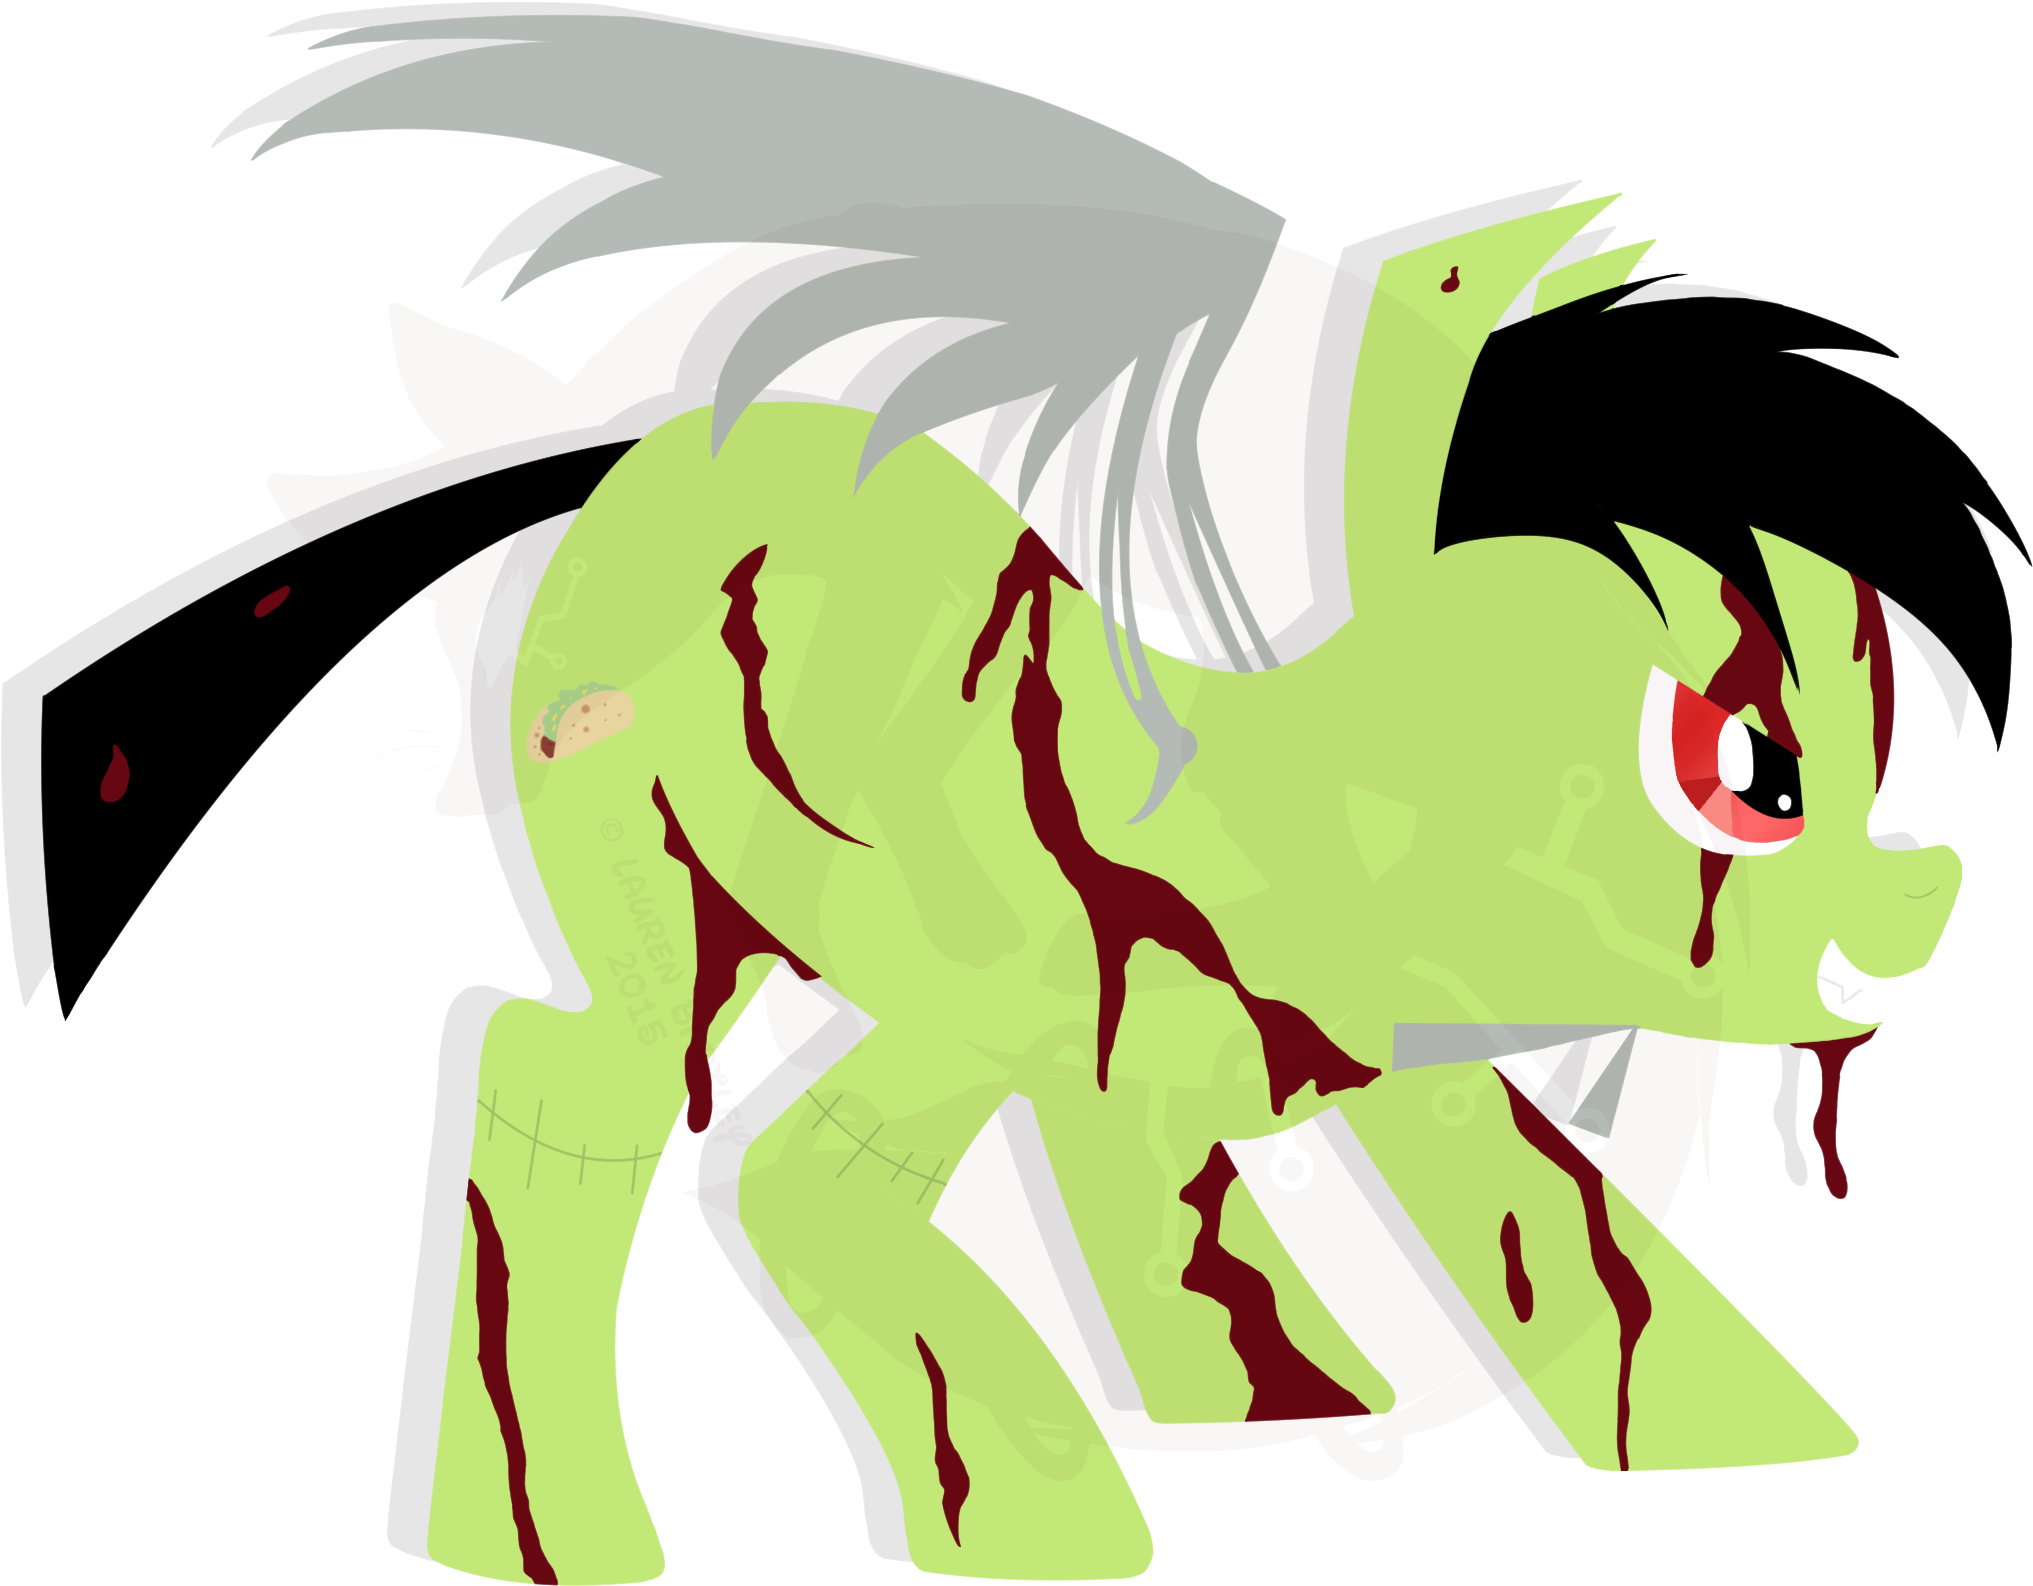 A Cartoon Of A Green Horse With Blood On Its Body